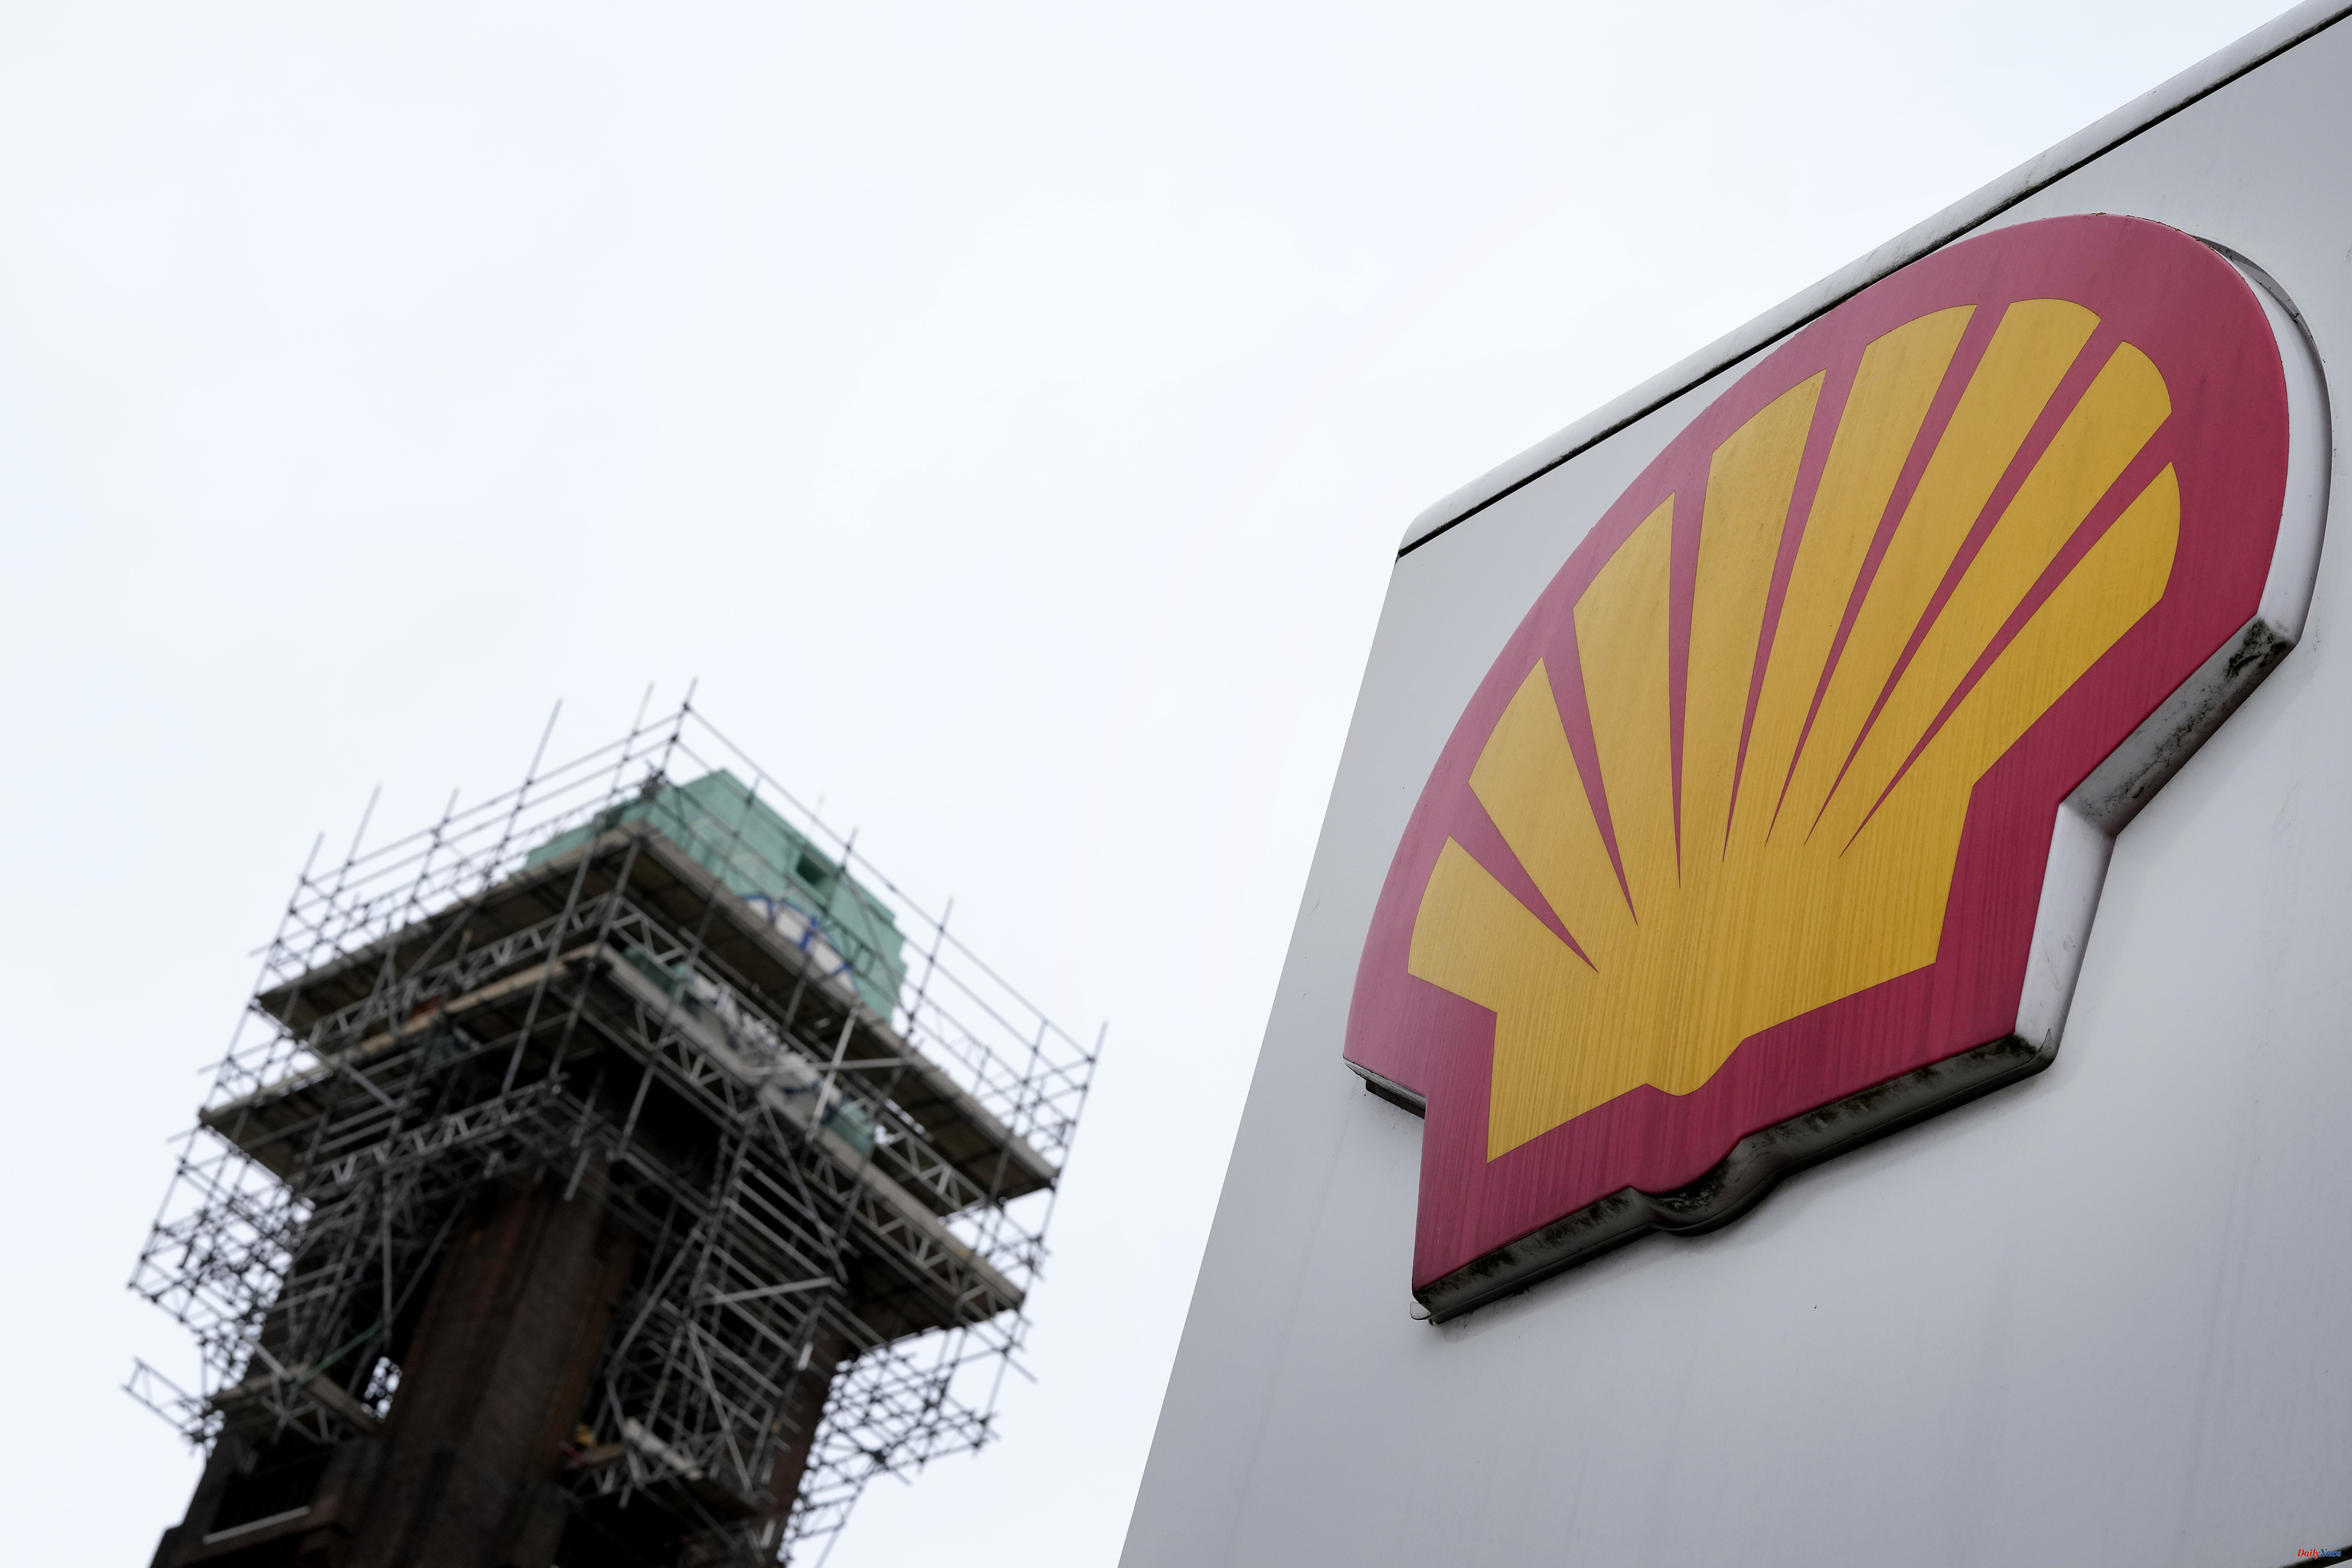 Economy Shell achieves the best result in its history in 2022 thanks to the gas business